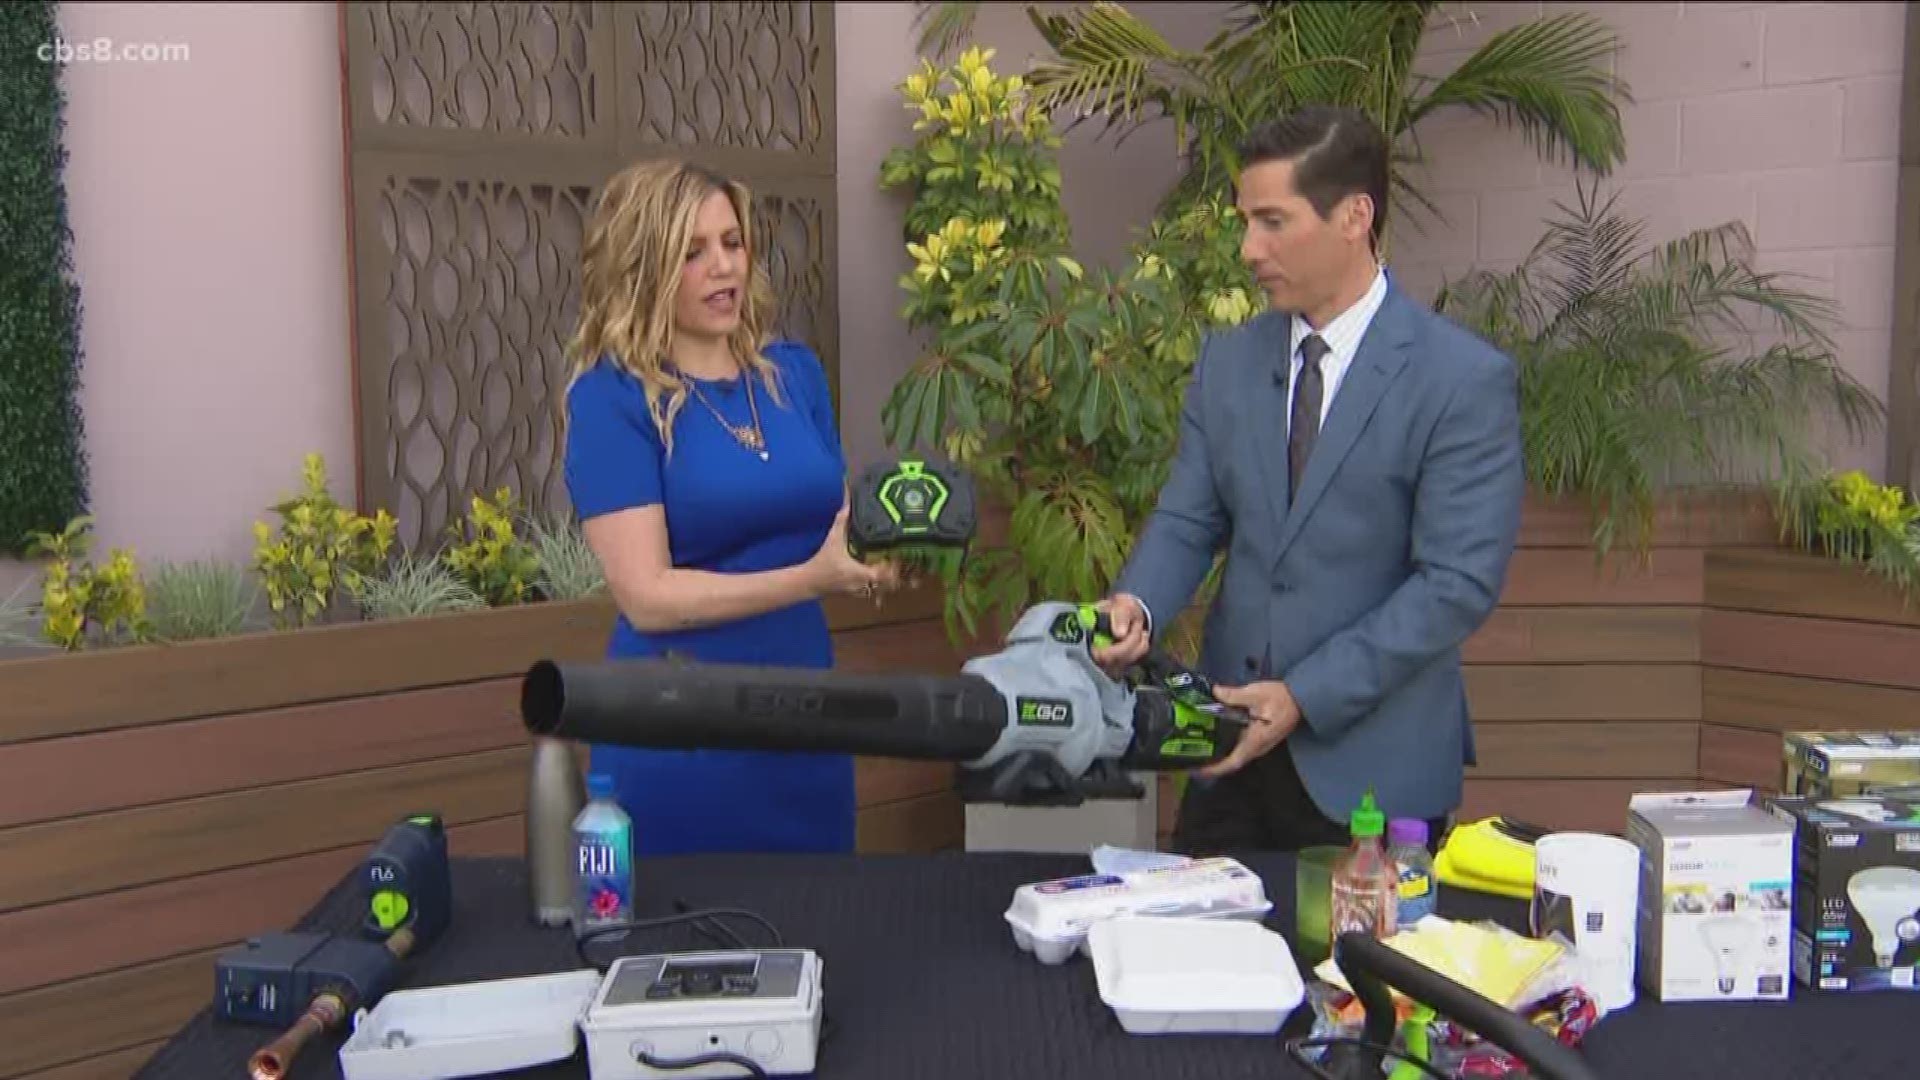 This Earth Day, home improvement and lifestyle expert Kathryn Emery is encouraging San Diegans to go green and save green.